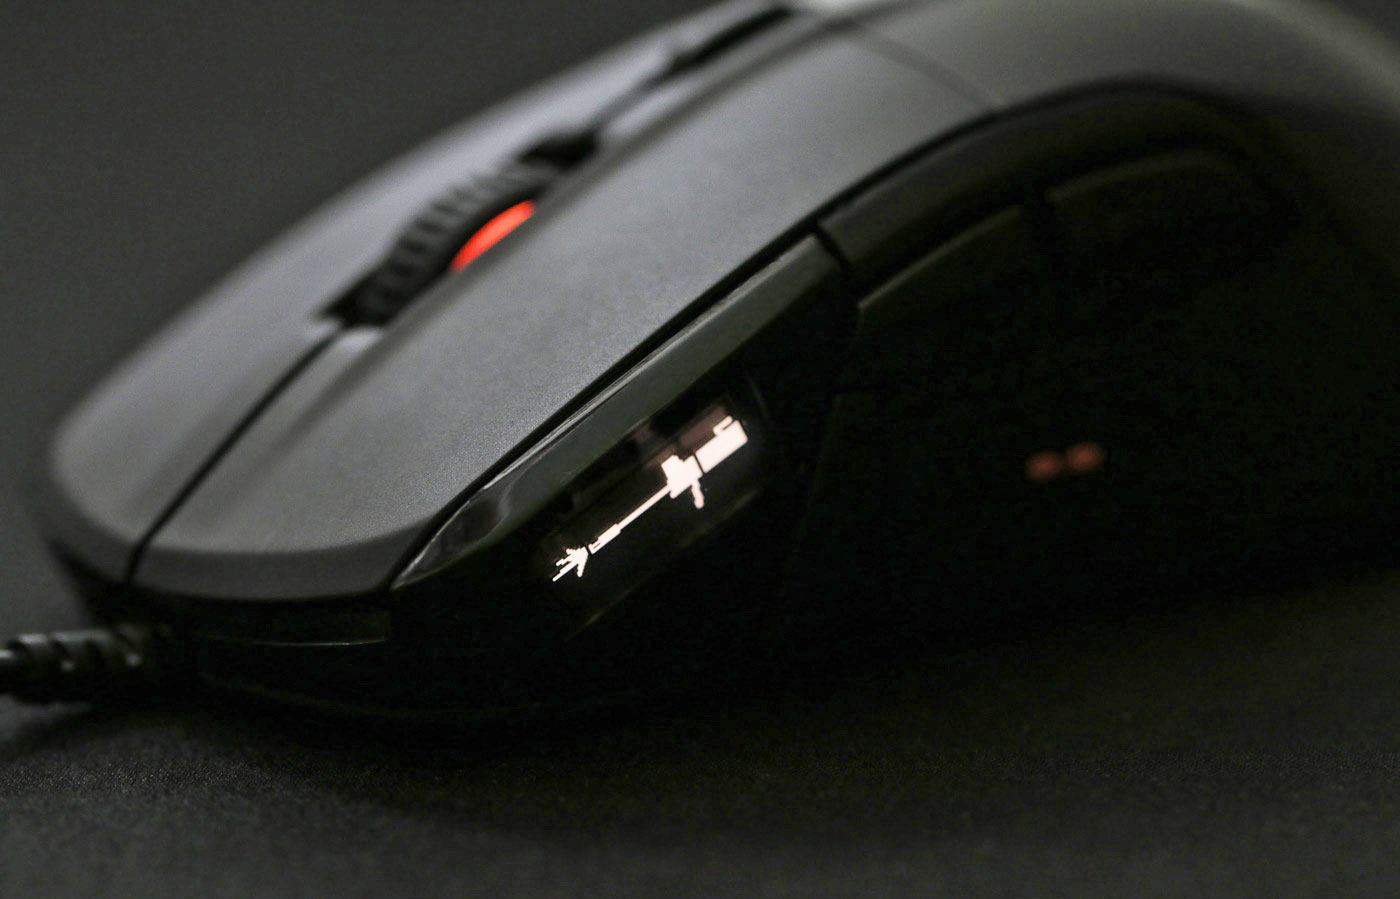 SteelSeries ships its OLED-packing gaming mouse